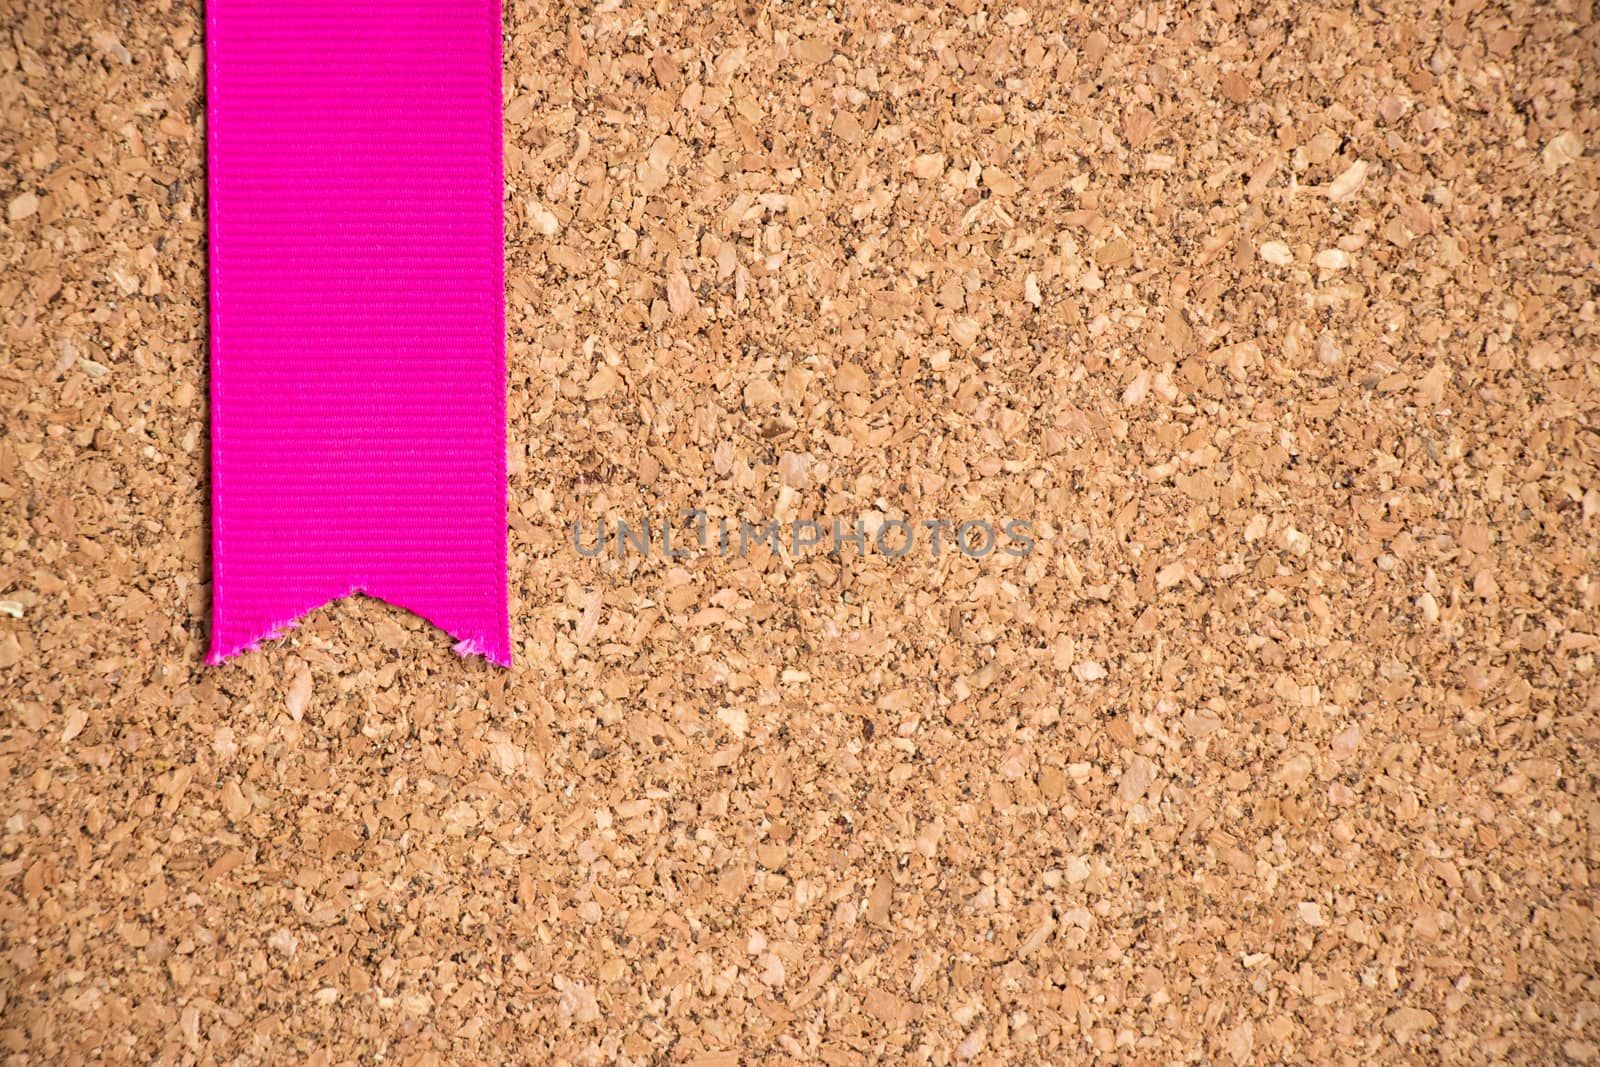 Pink ribbon on cork board texture background by Hengpattanapong